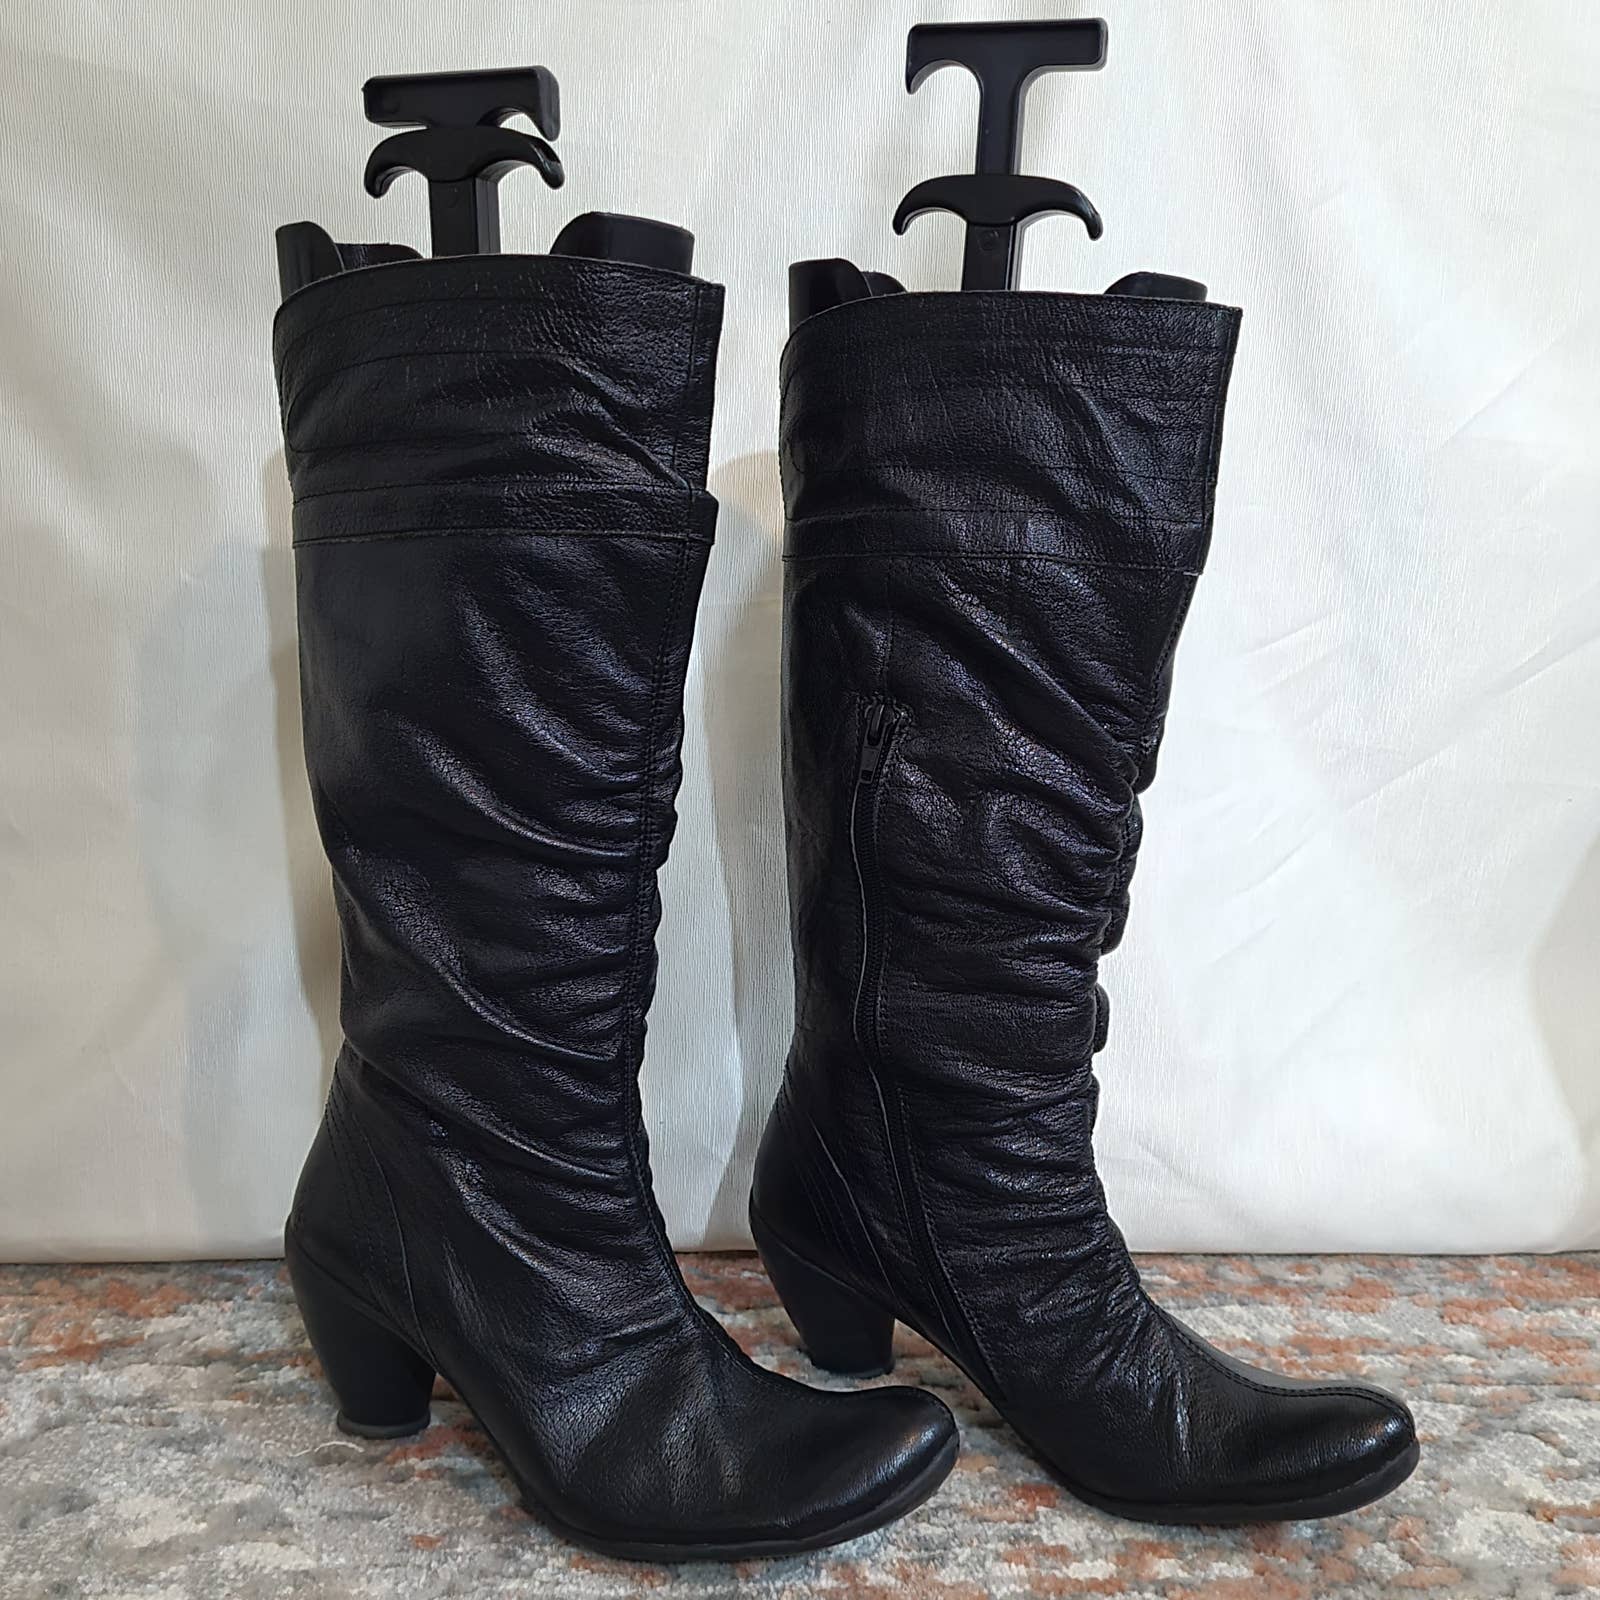 Fly London Black Leather Rouched Front Boots - Size 7.5Markita's ClosetFLY London